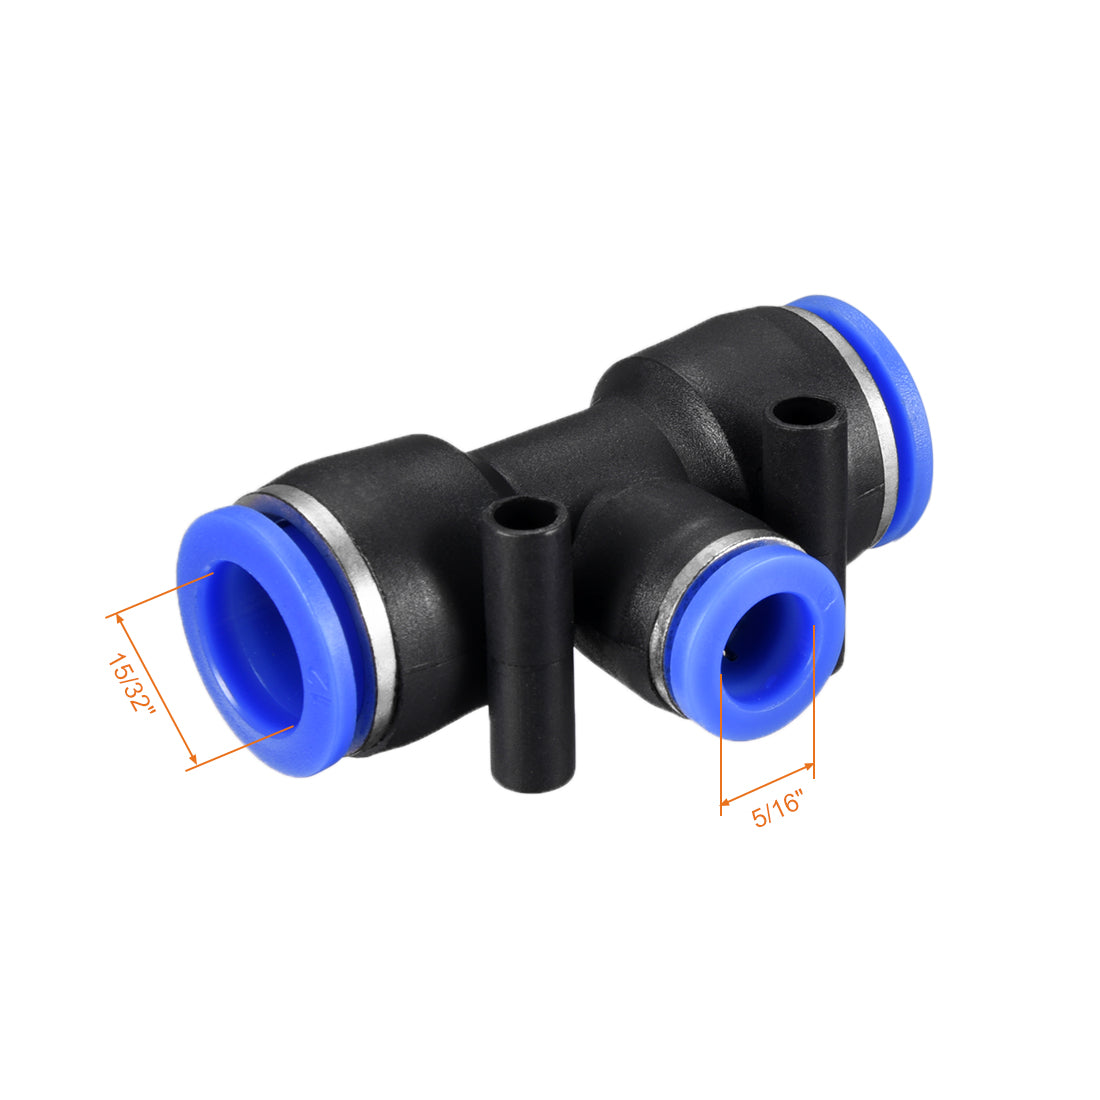 uxcell Uxcell 4 pcs Push To Connect Fittings T Type Tube Connect 15/32“ -5/16” od Push Fit Fittings Tube Fittings Push Lock Blue (12-8mm T tee)